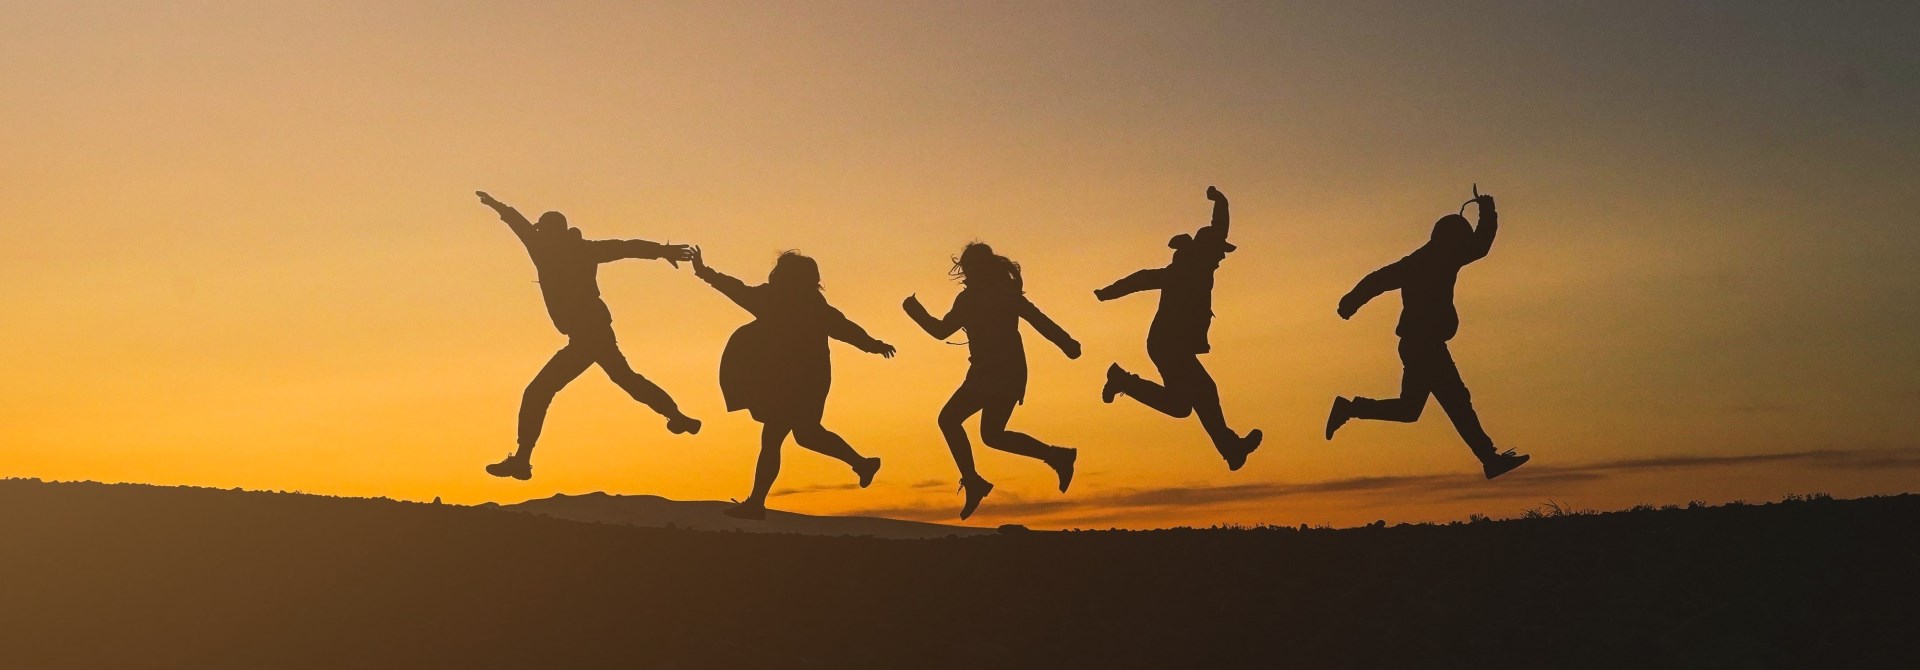 Silhouette of a group of people jumping for joy on a hill at dusk.